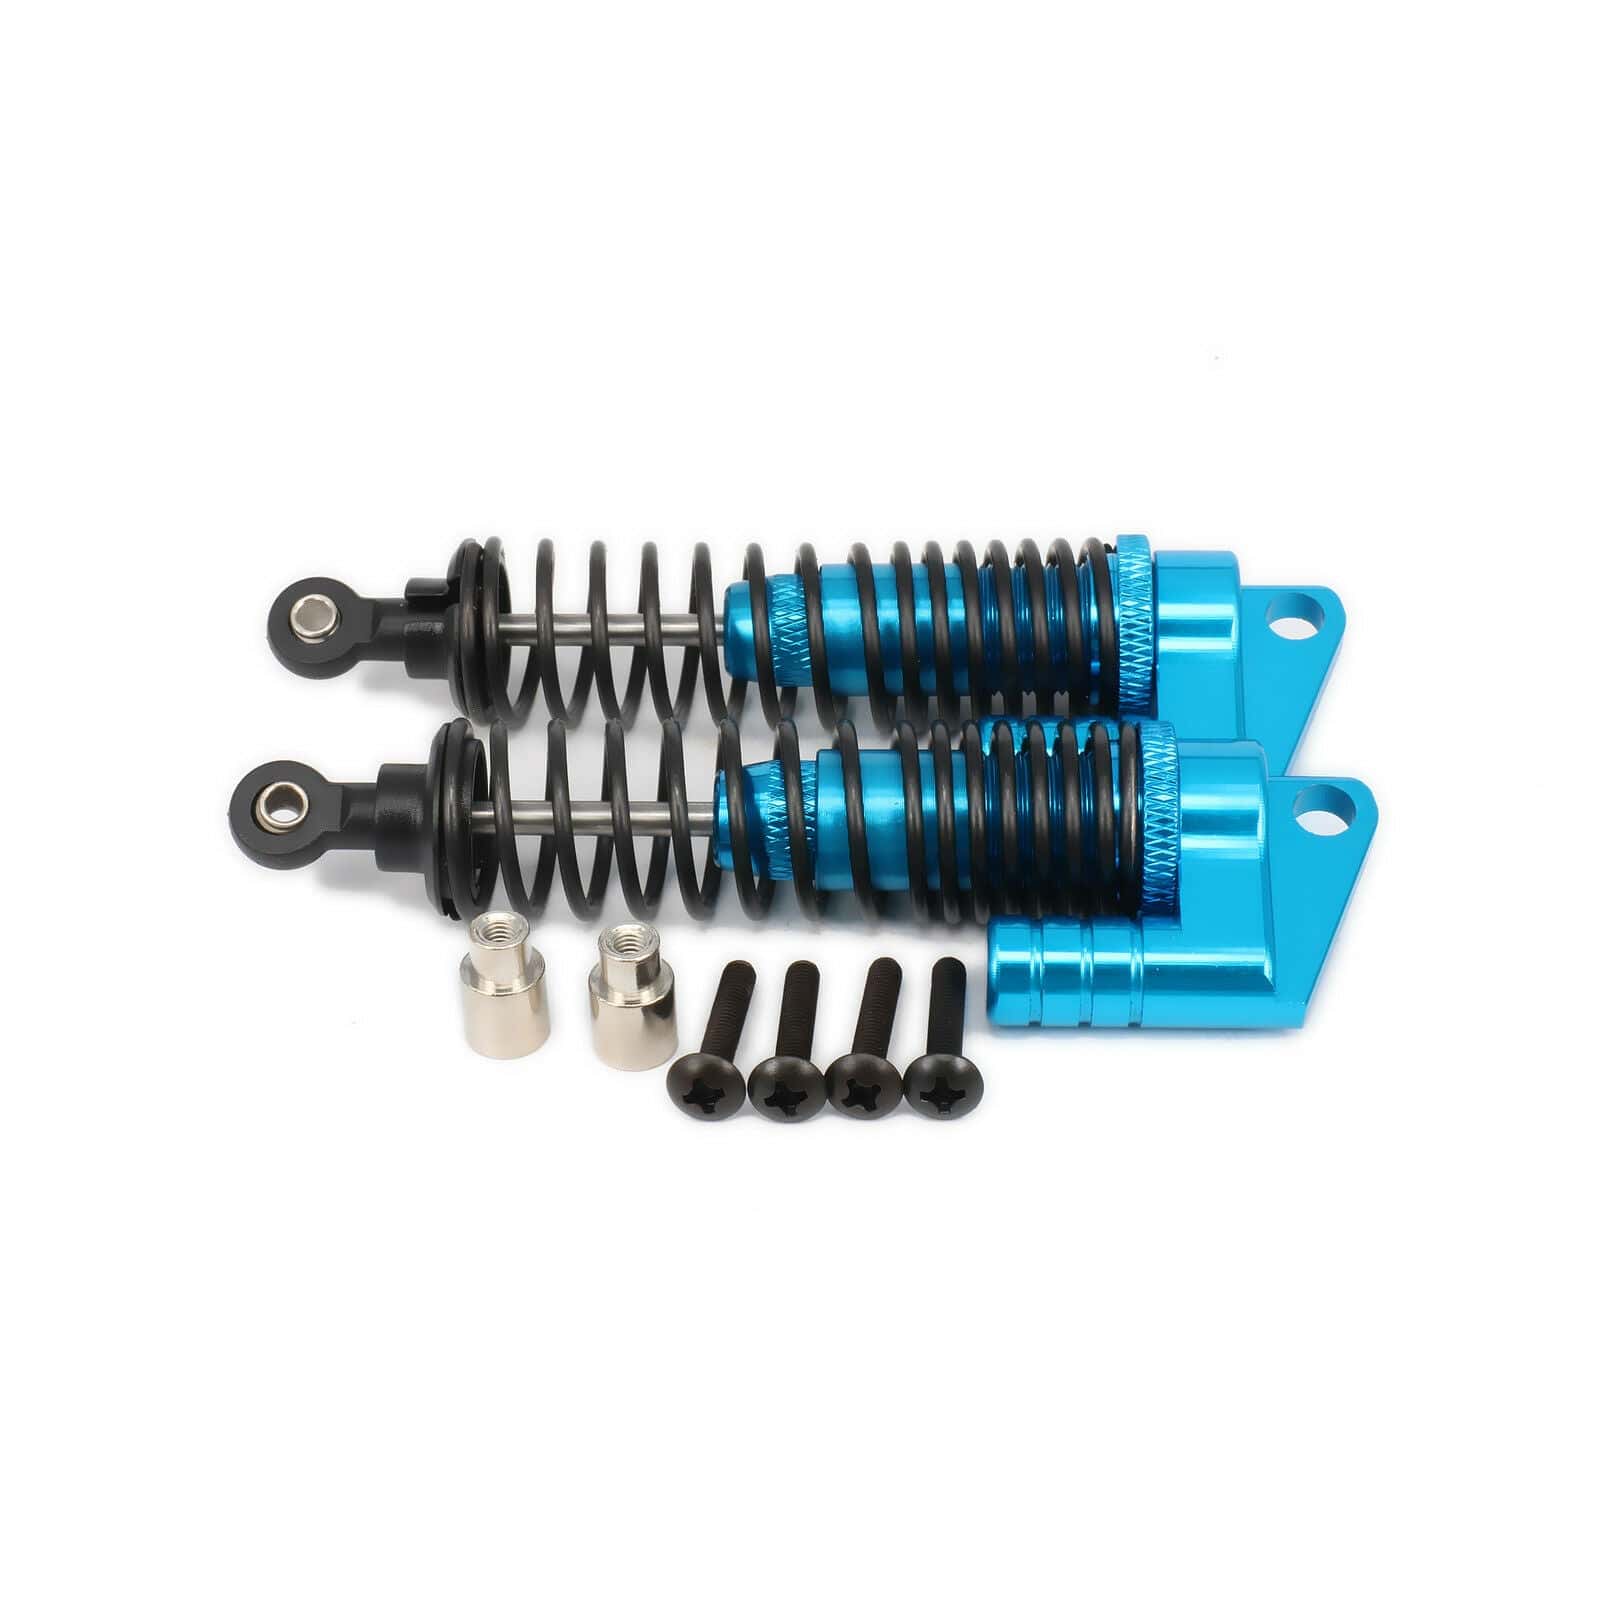 RCAWD Axial Yeti upgrade metal 130mm RC Shock Absorber Oil Filled styl